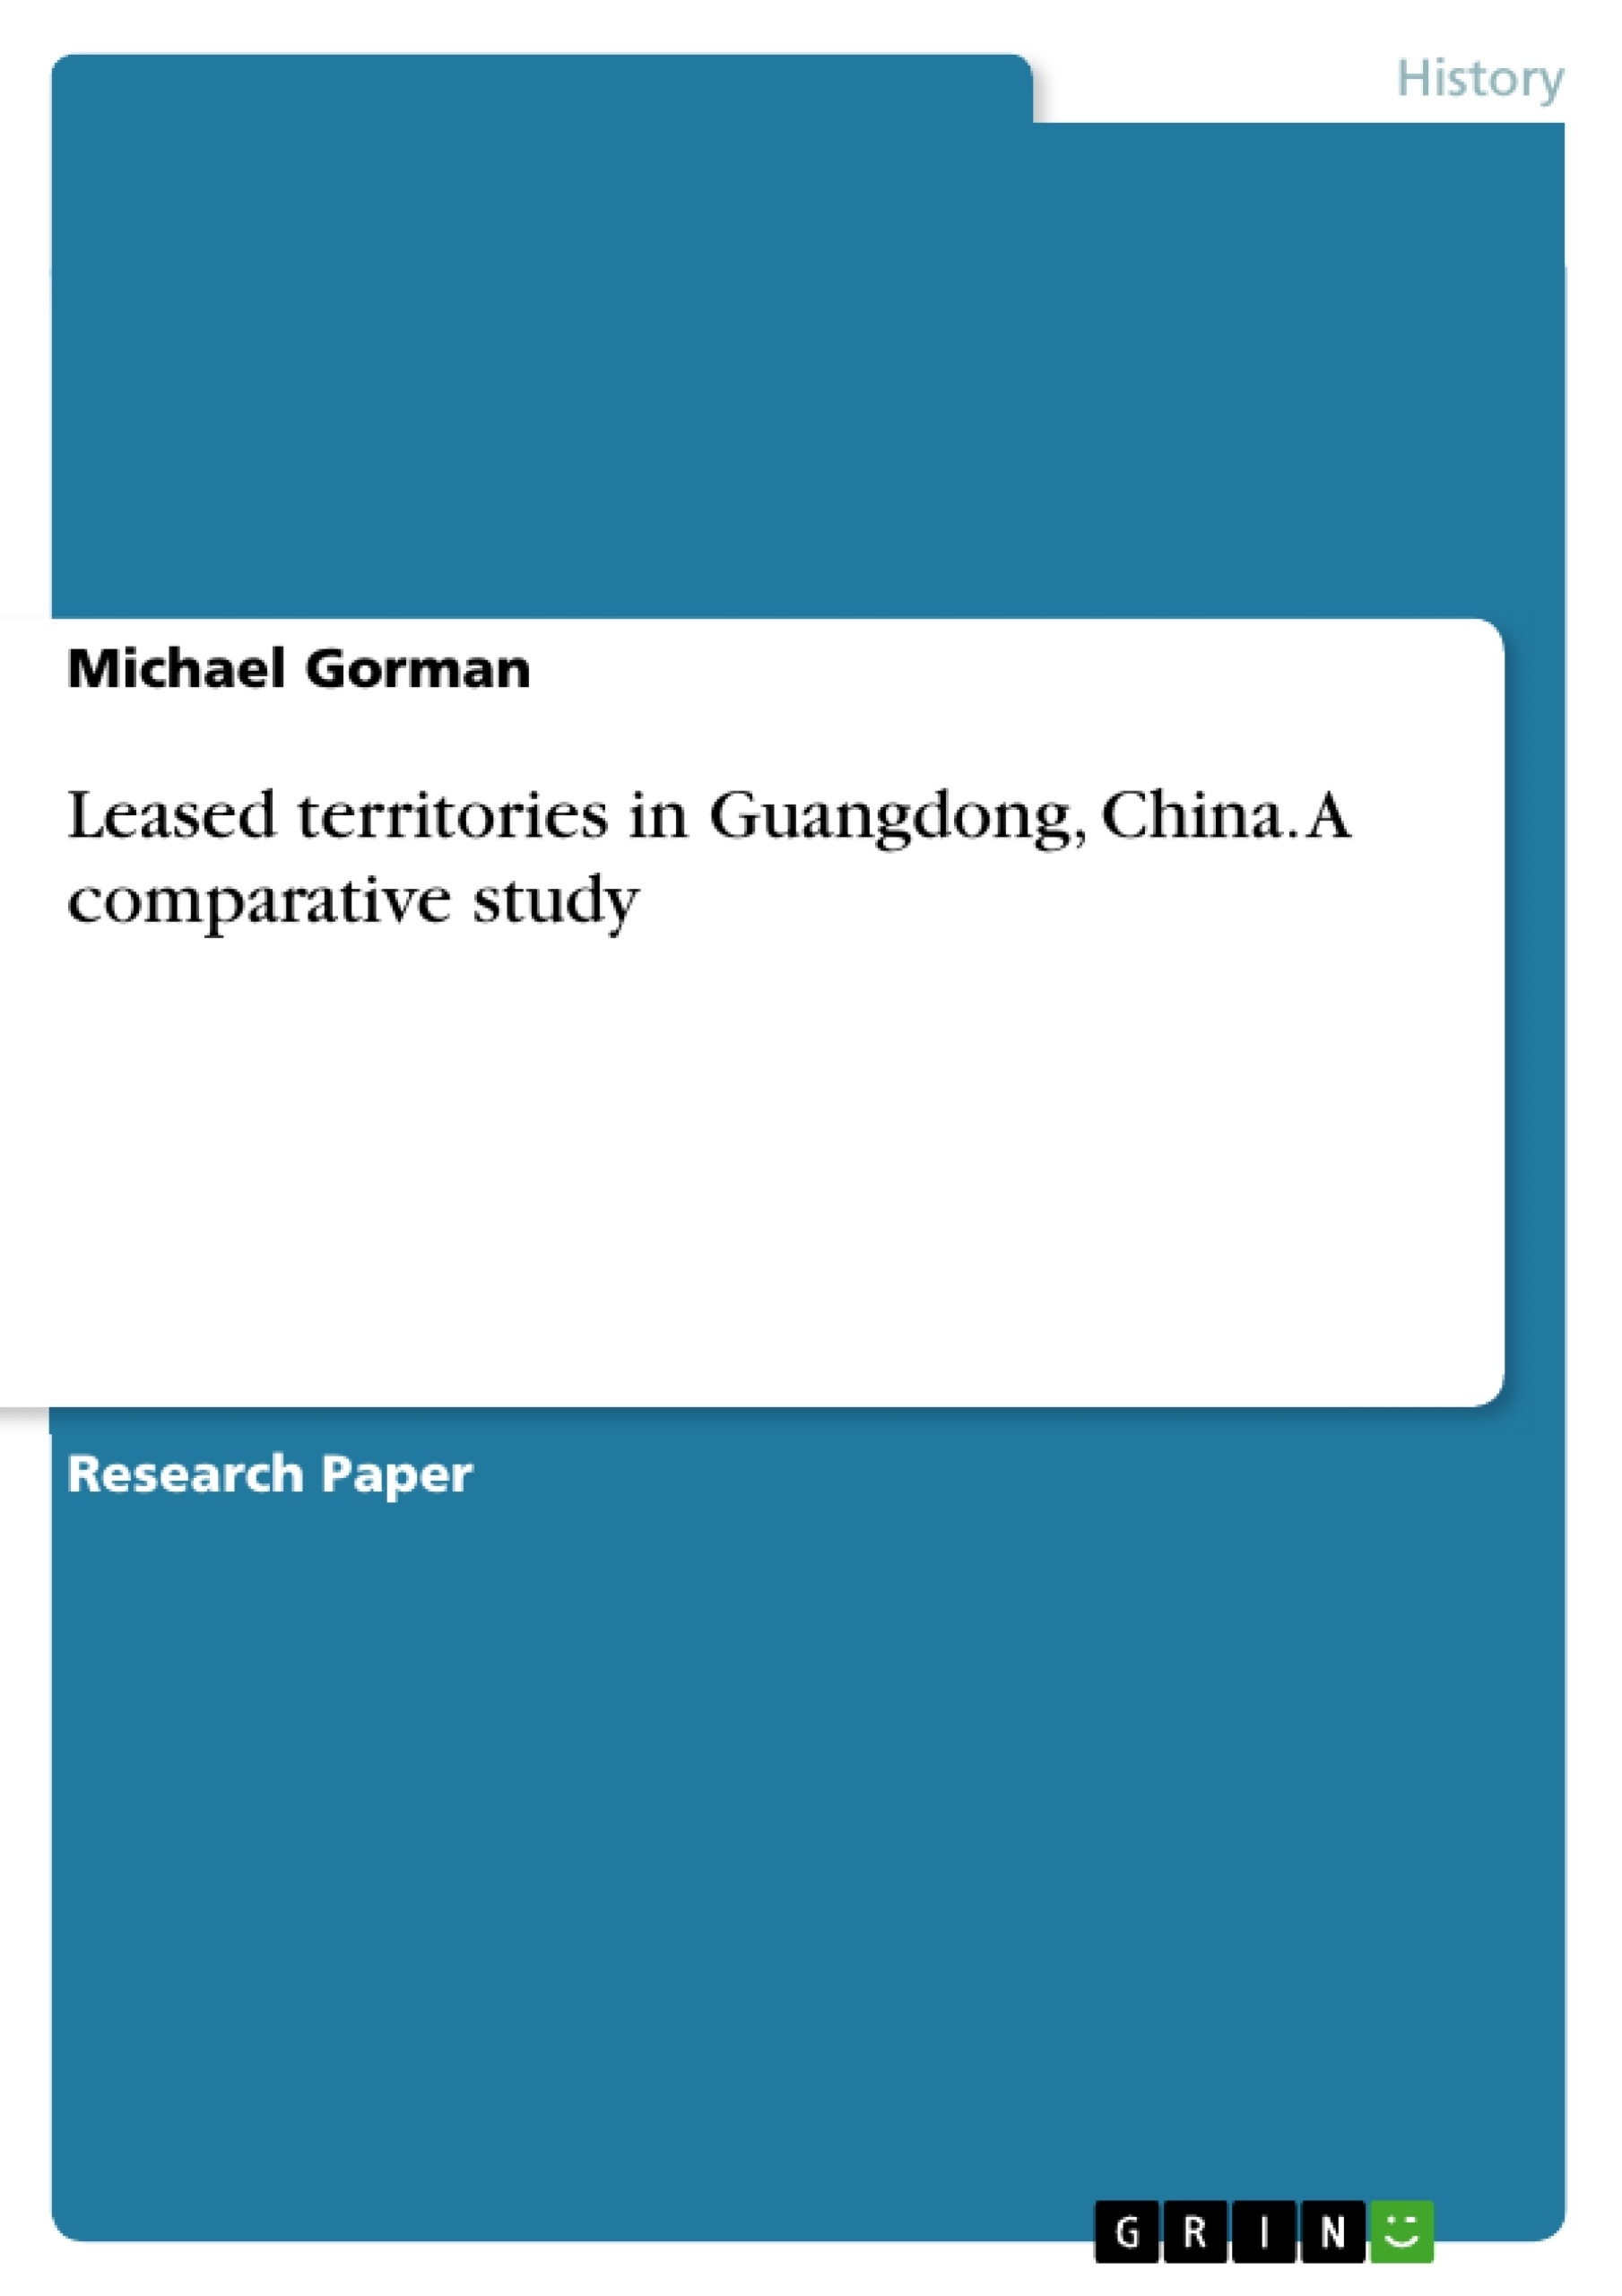 comparative　Leased　A　territories　study　in　Guangdong,　China.　GRIN